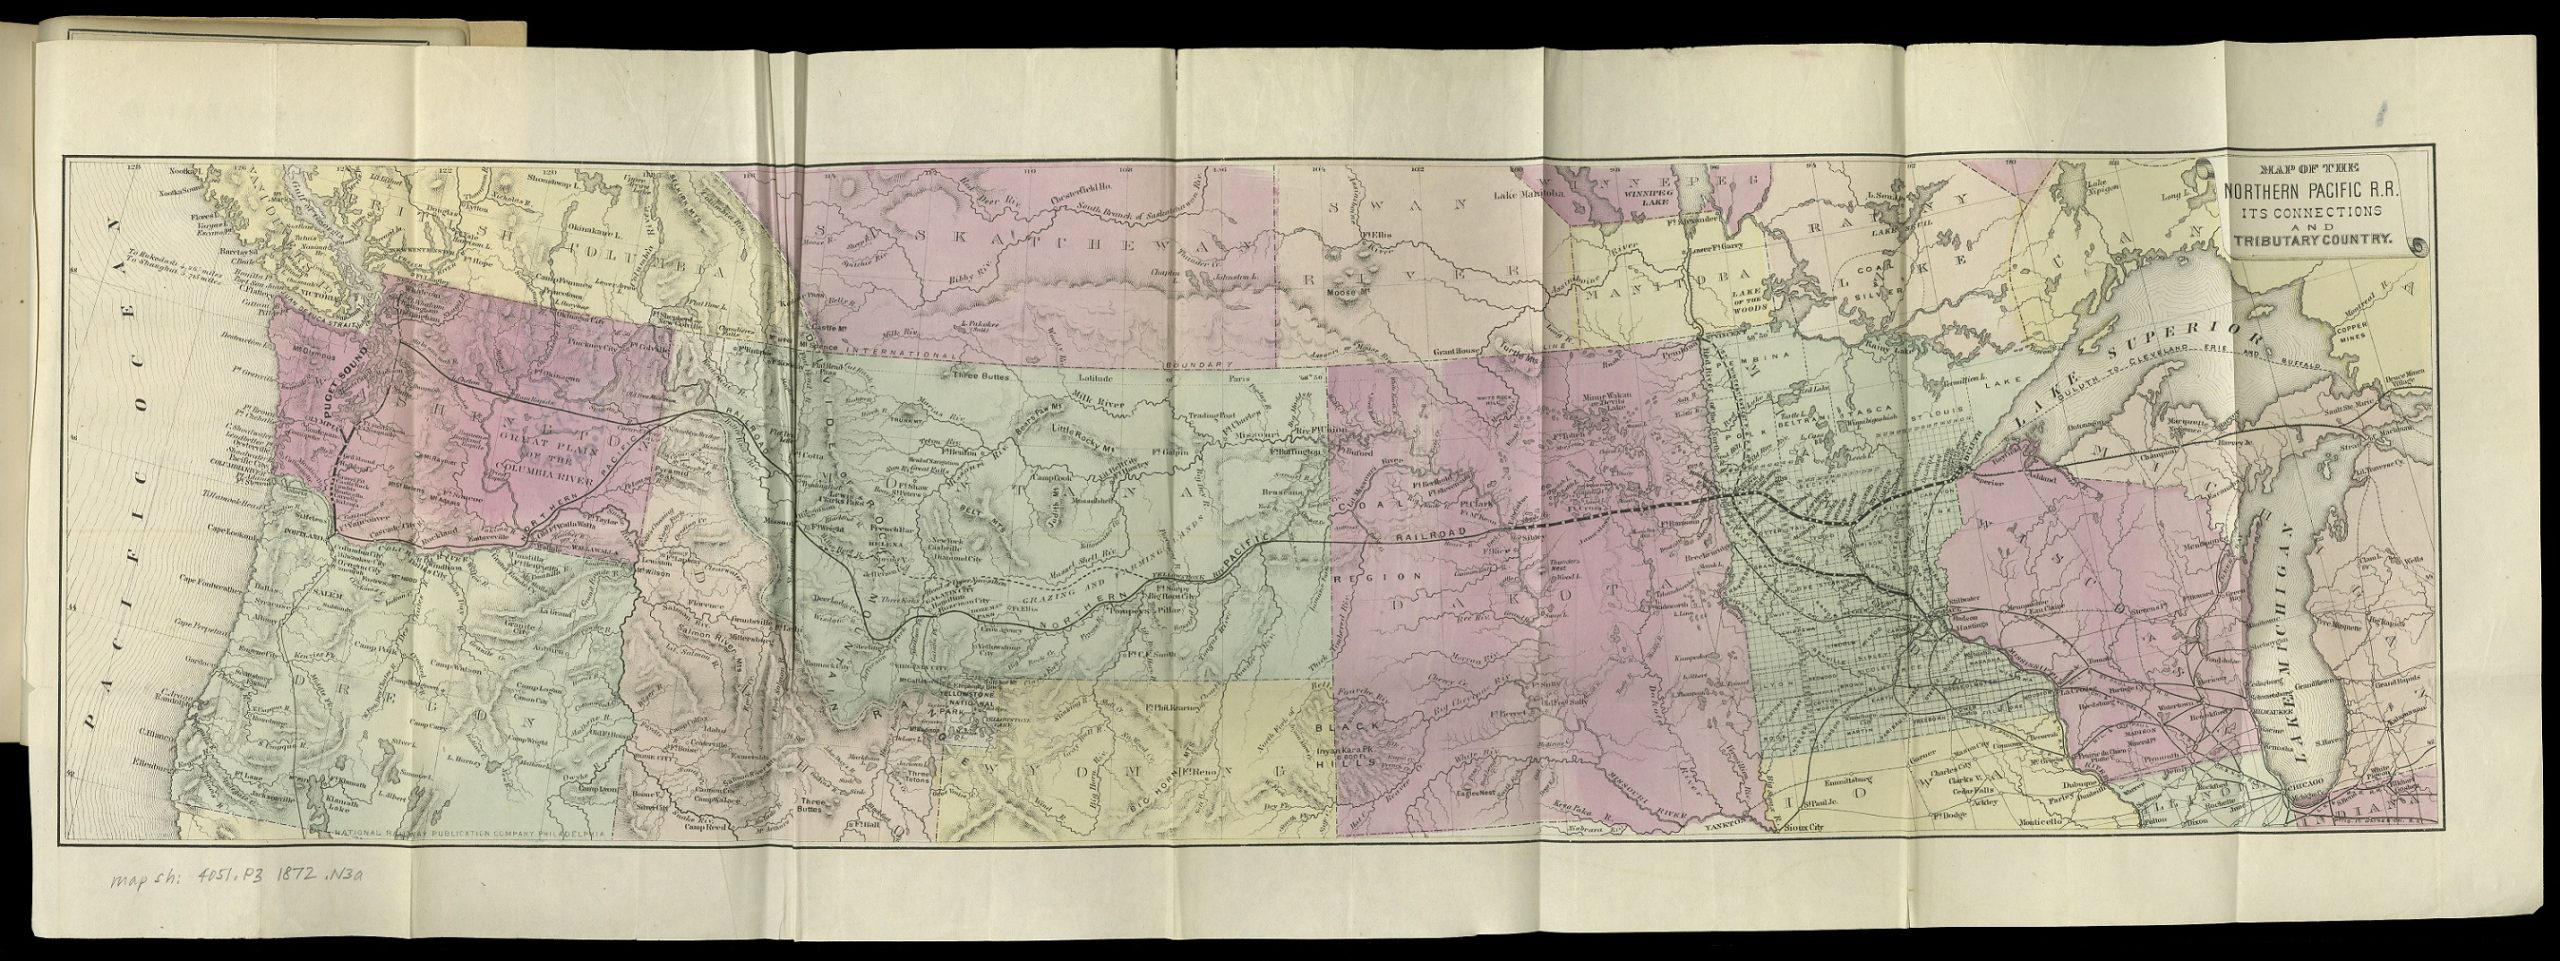 Fold-out map depicting the railroad route from the northern end of Lake Michigan through Wisconsin, Minnesota, North Dakota, Montana, northern Idaho, and Washington state.